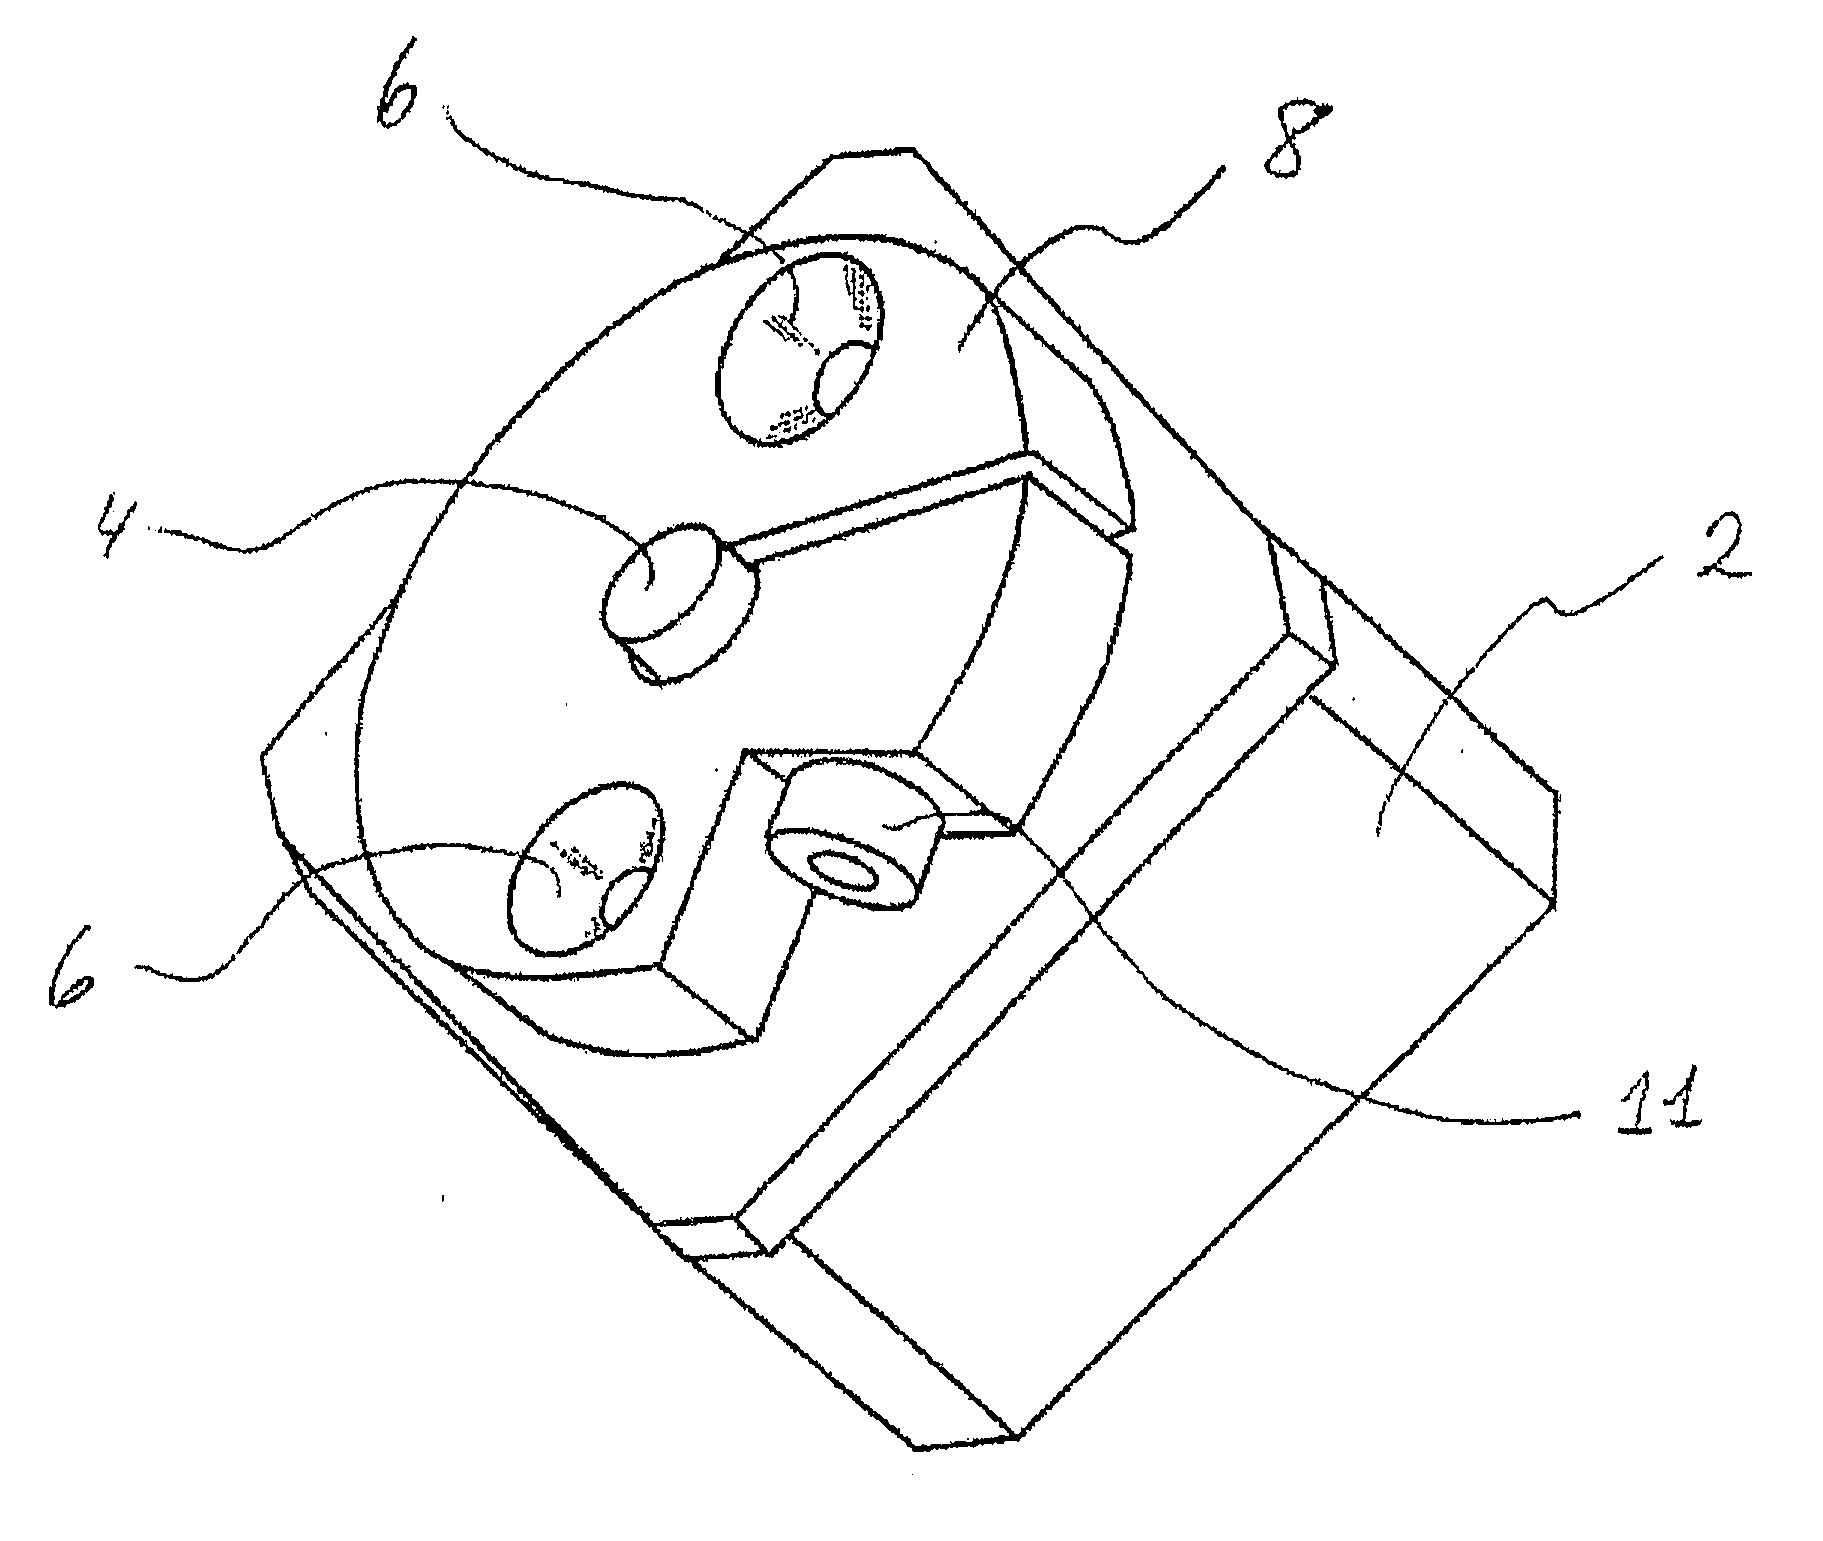 Adaptor for an Axle